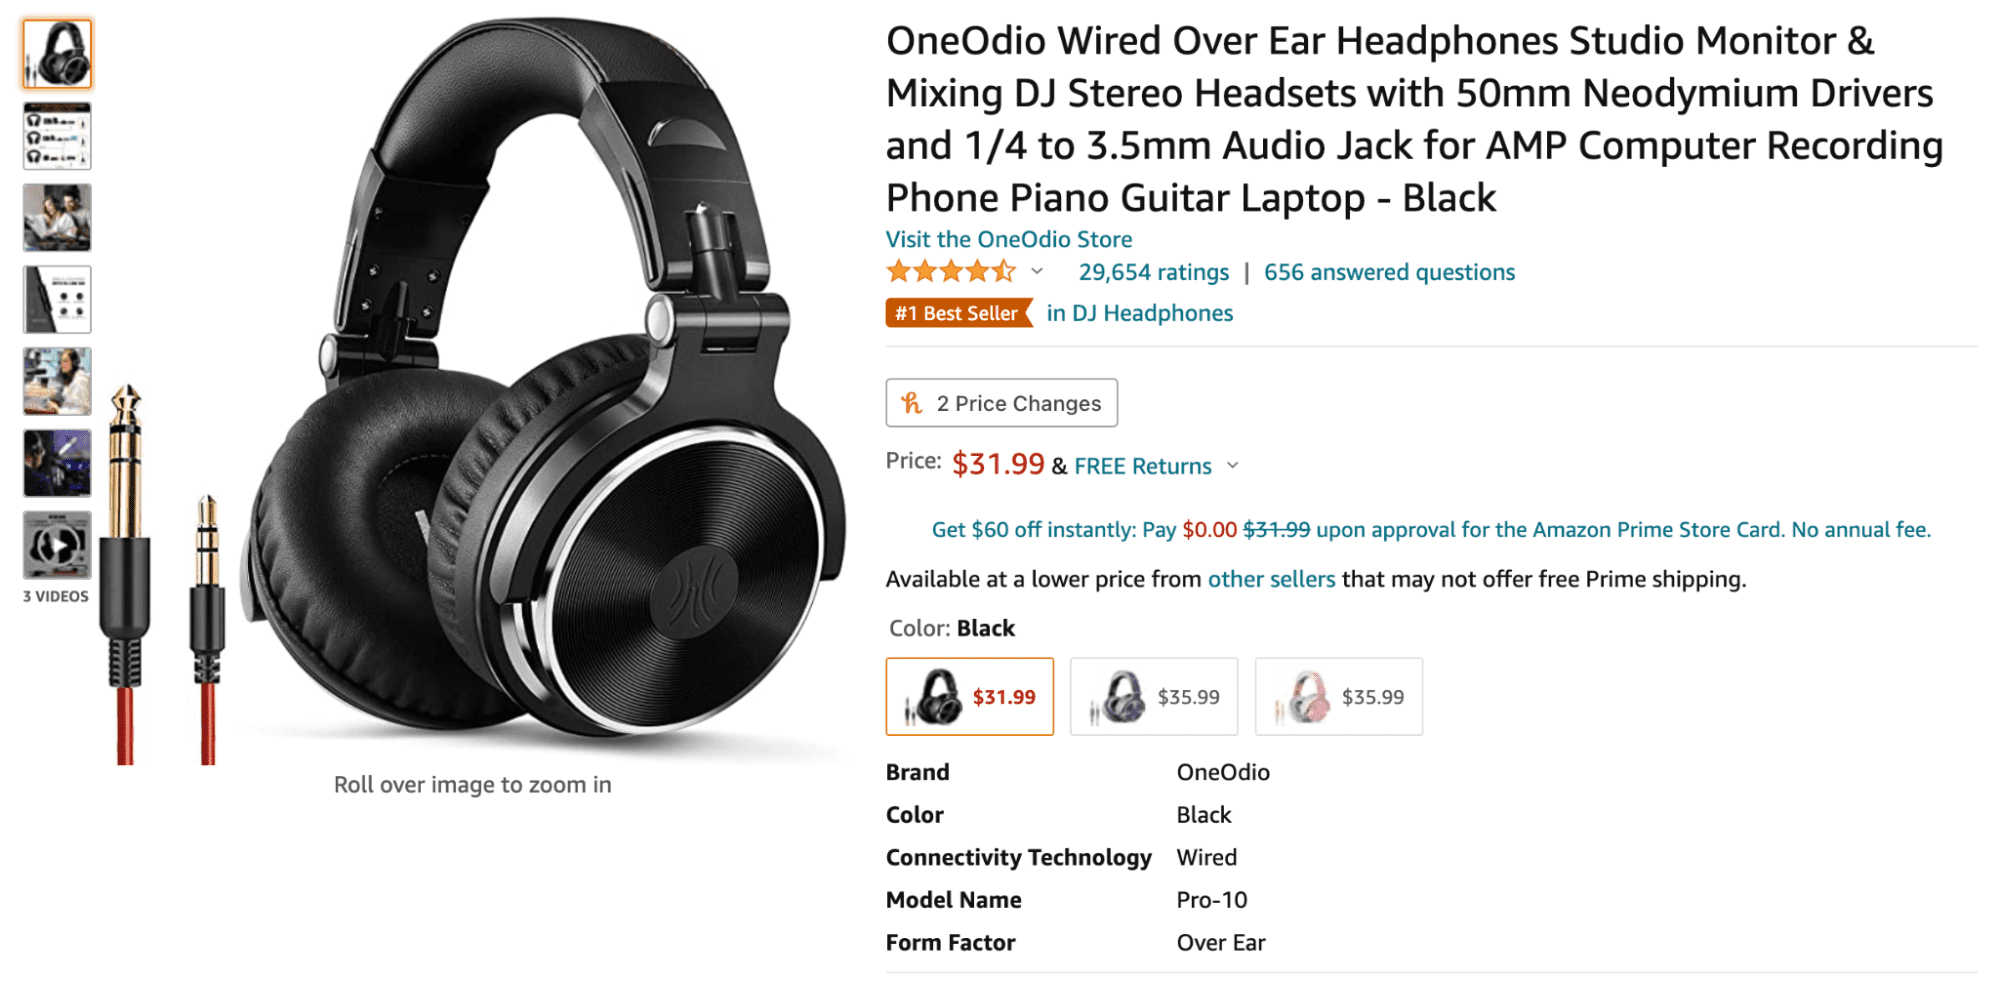 OneOdio Wired Over-Ear Headphones